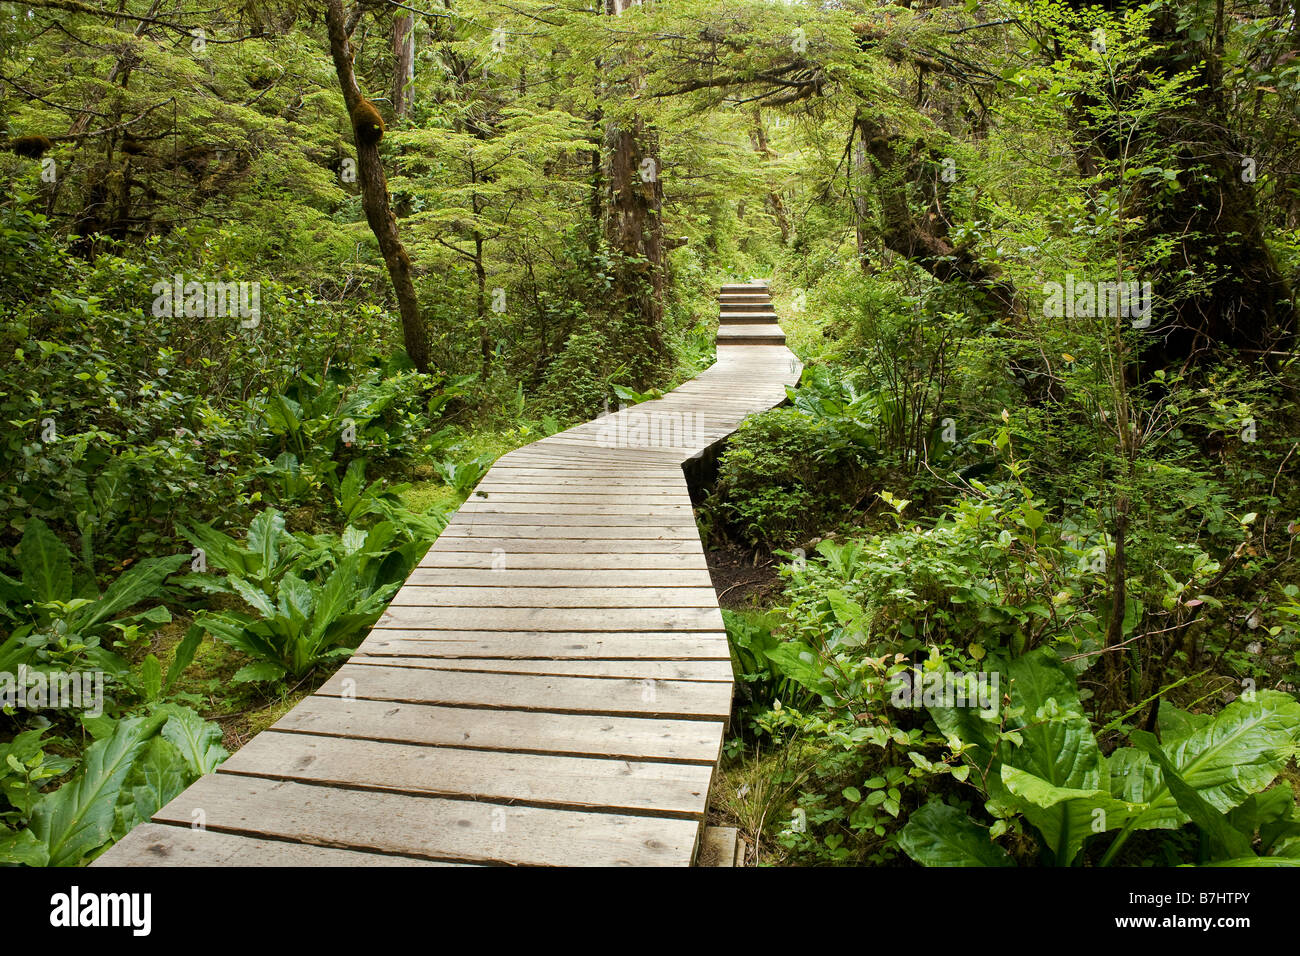 BRITISH COLUMBIA - Boardwalk section of trail on the North Coast Trail in Cape Scott Provincial Park on Vancouver Island, Stock Photo